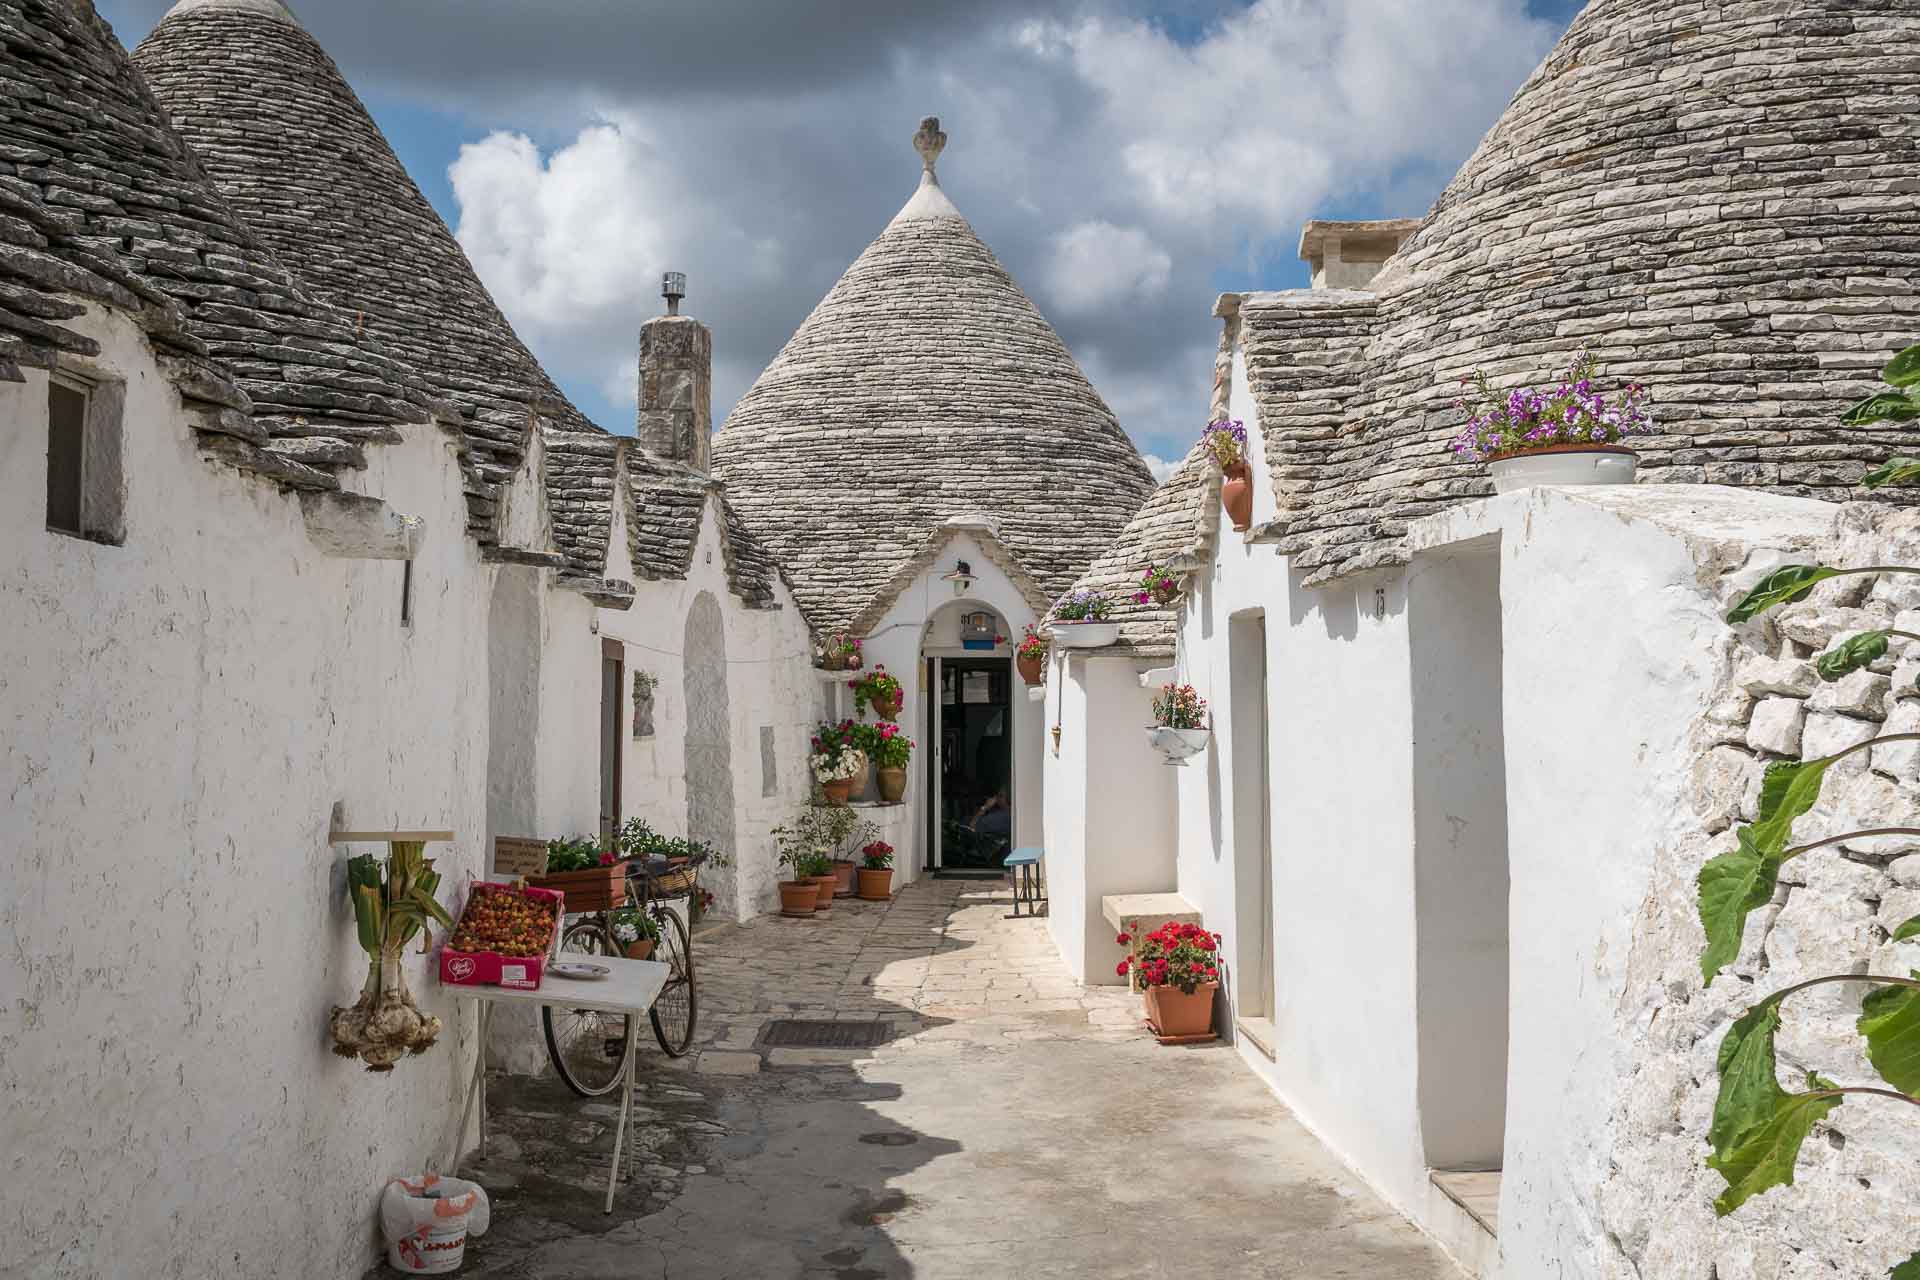 A dead end with trulli houses in alberobelo Puglia